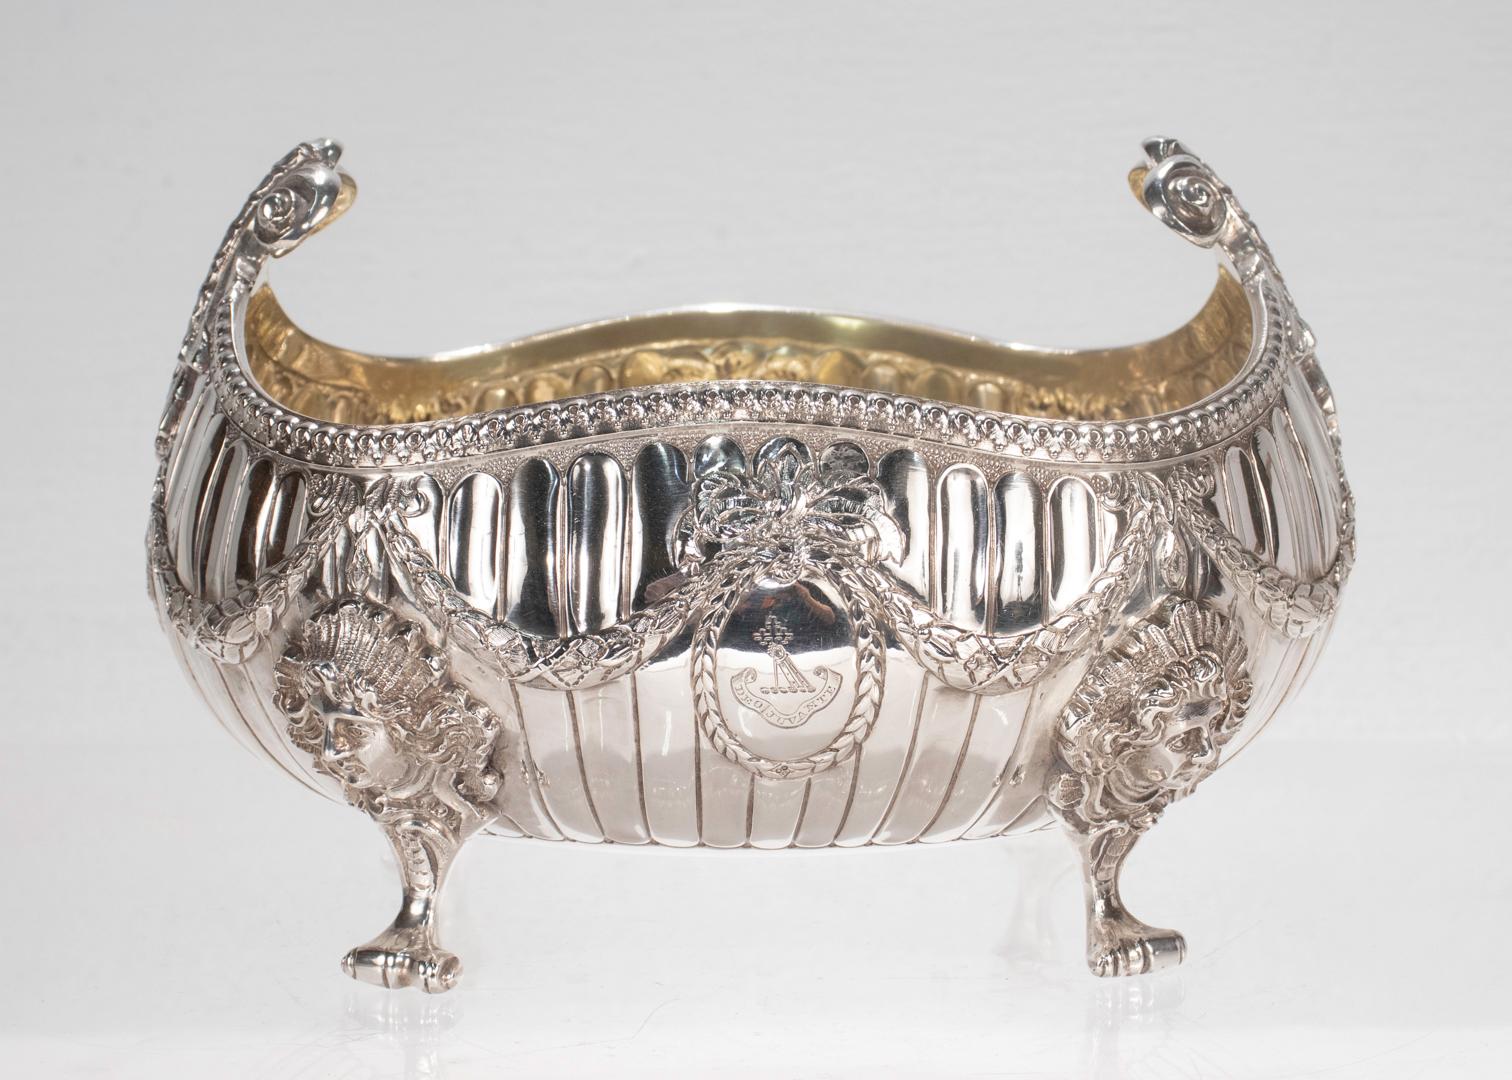 A fine Victorian crested English bowl.

In sterling silver.

By George Aldwinckle. 

In a George II Revivalist style with scrolled feet and legs that terminate in human faces supporting a ribbed body with a scalloped rim decorated with a laurel leaf